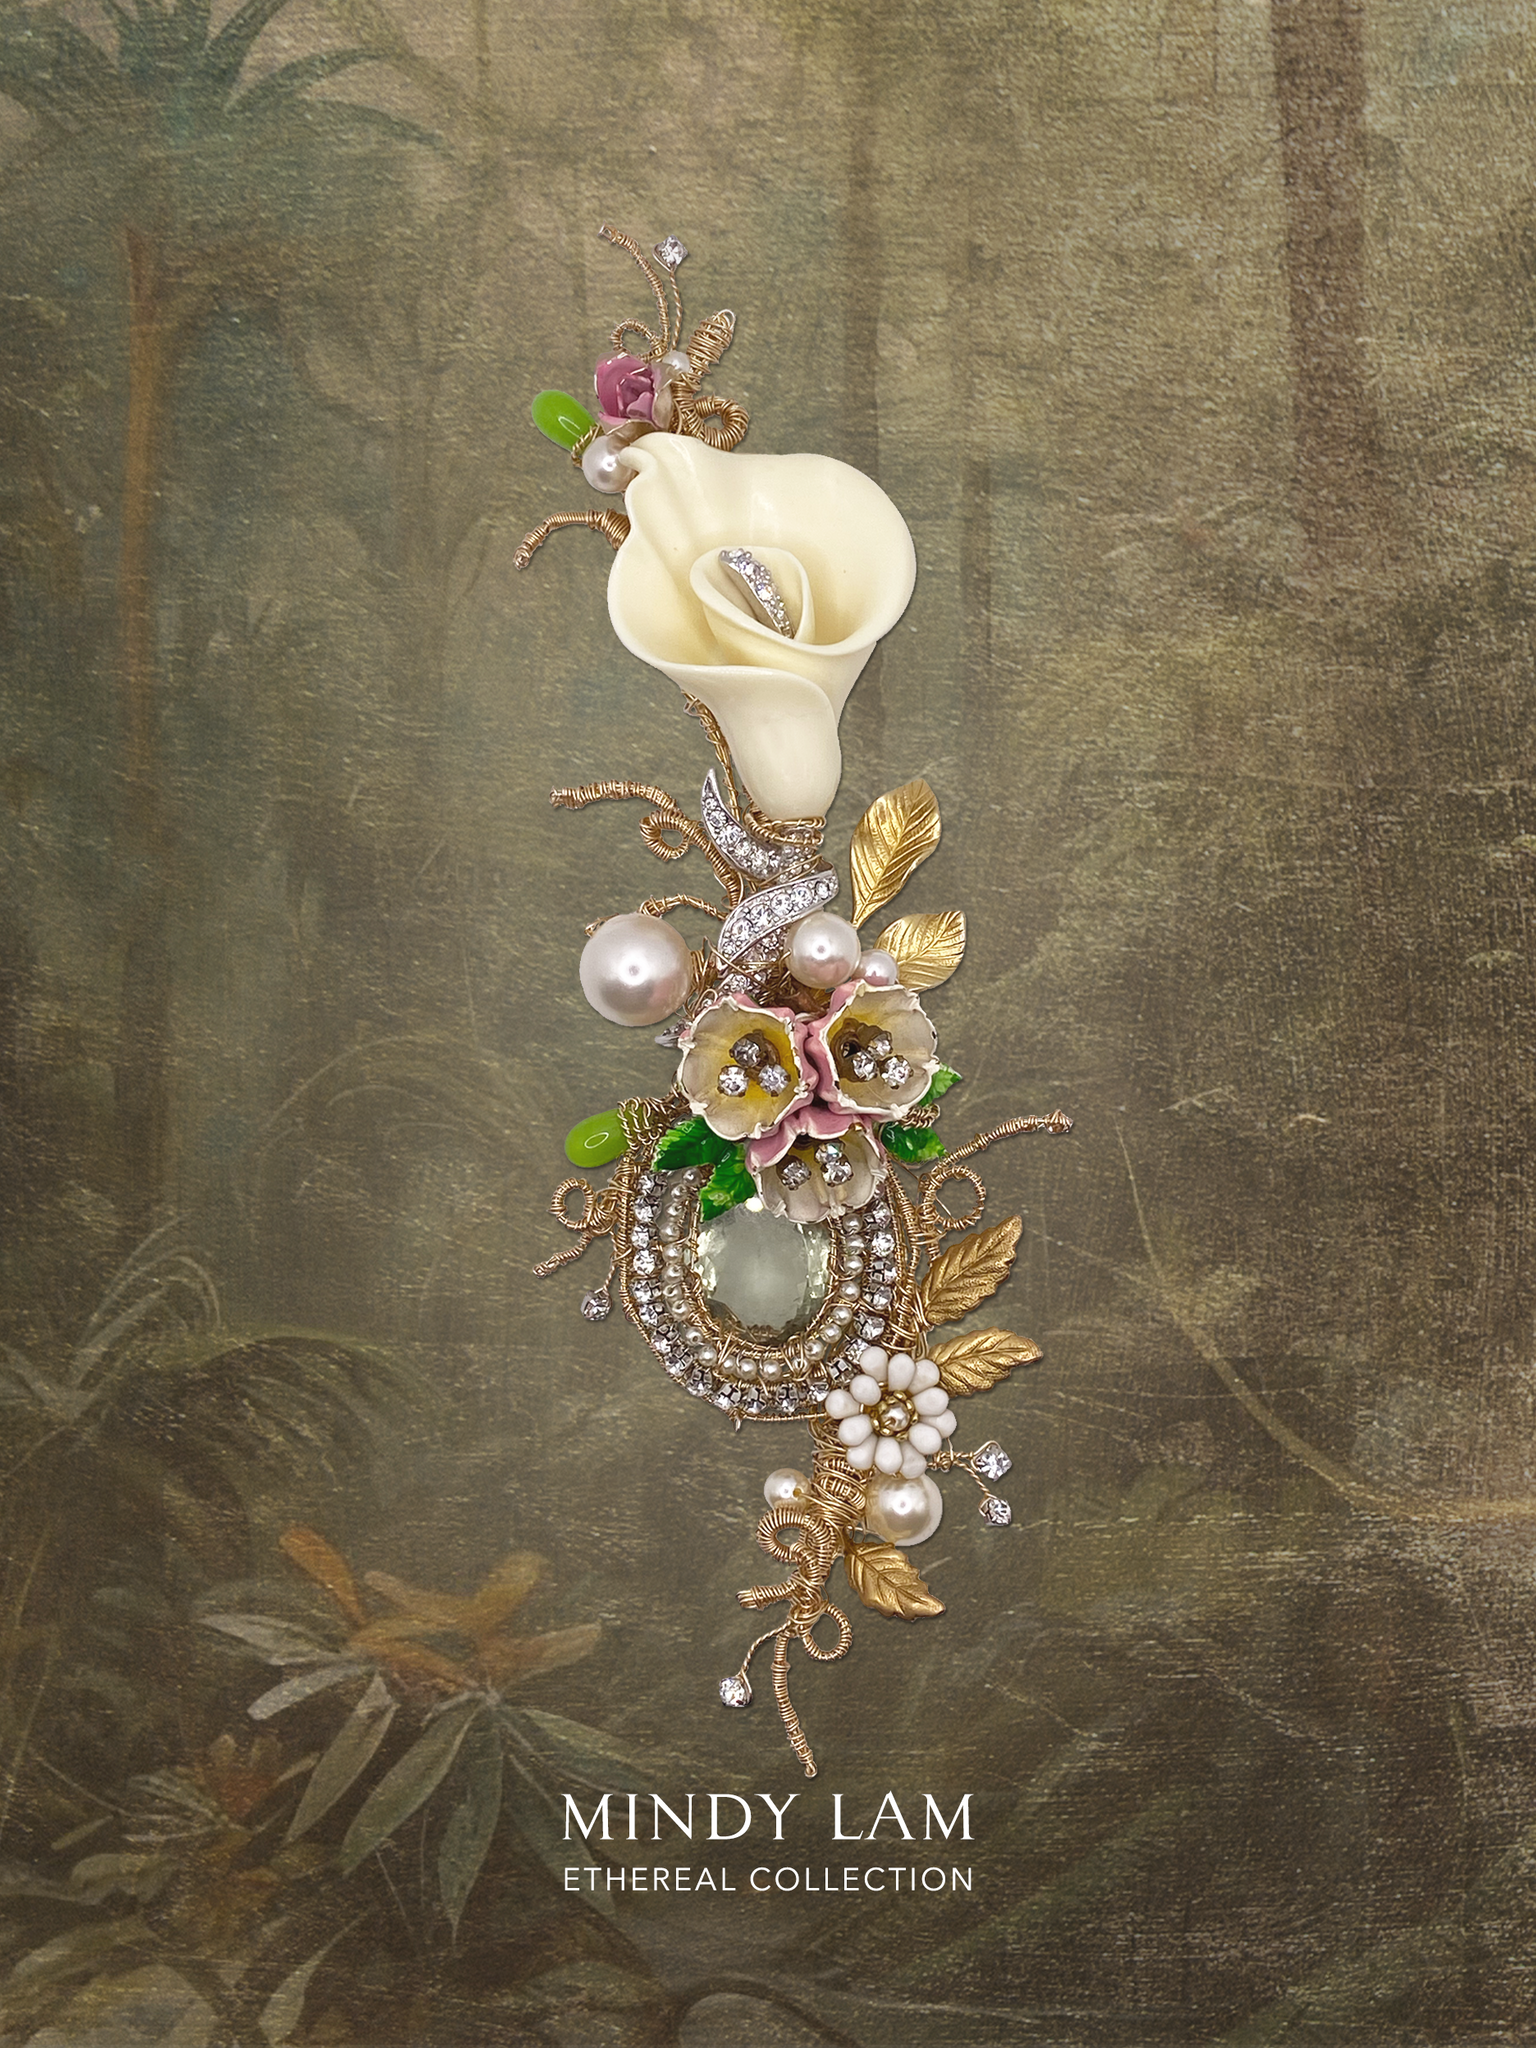 Ethereal Collection Lapel Pin - Love of the Darling Lily